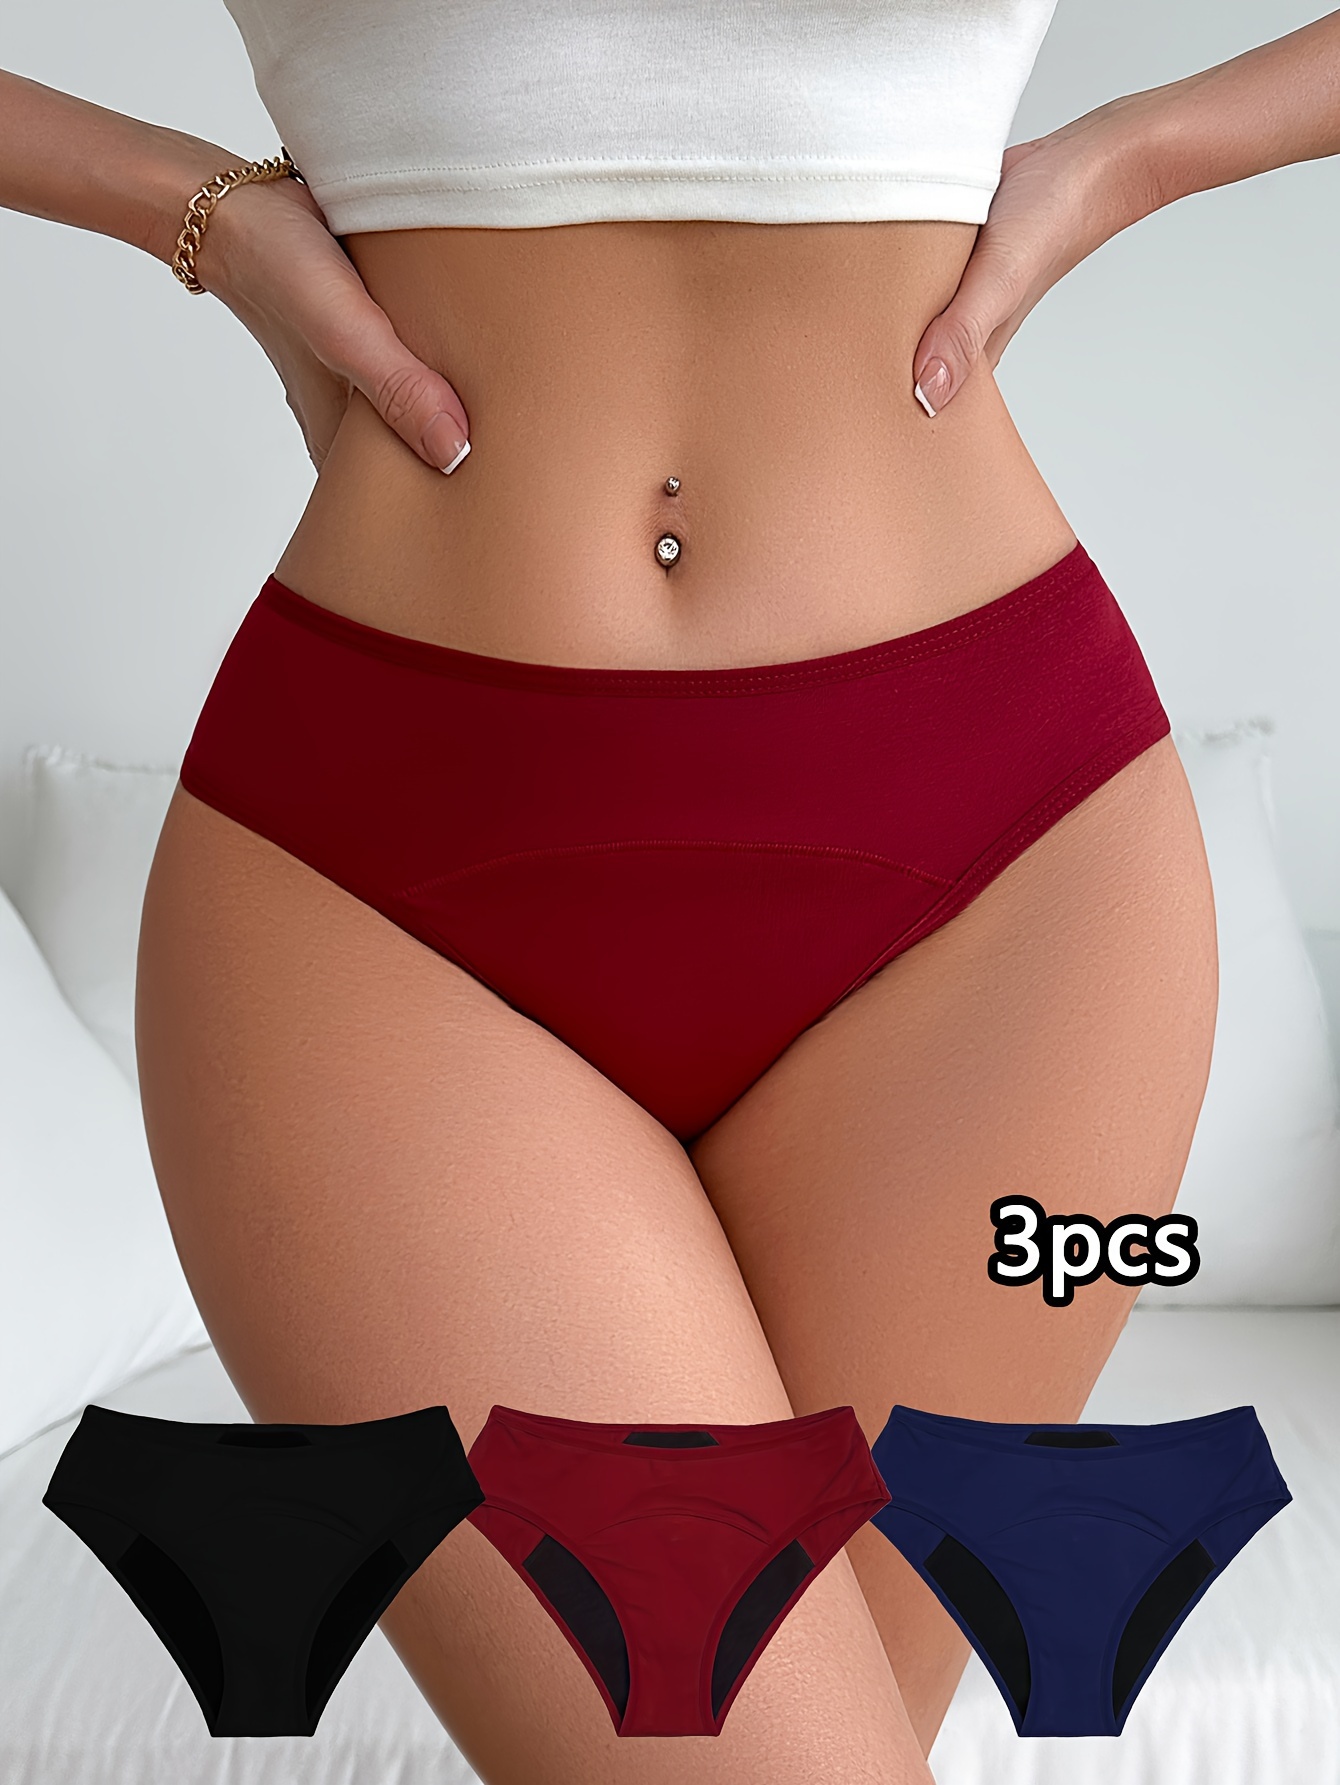 1 Pc Simple Period Panties, Pocket For Body Warmer Warm Stickers Leak-proof  High * Soft & Comfy Intimates Briefs, Women's Lingerie & Underwear